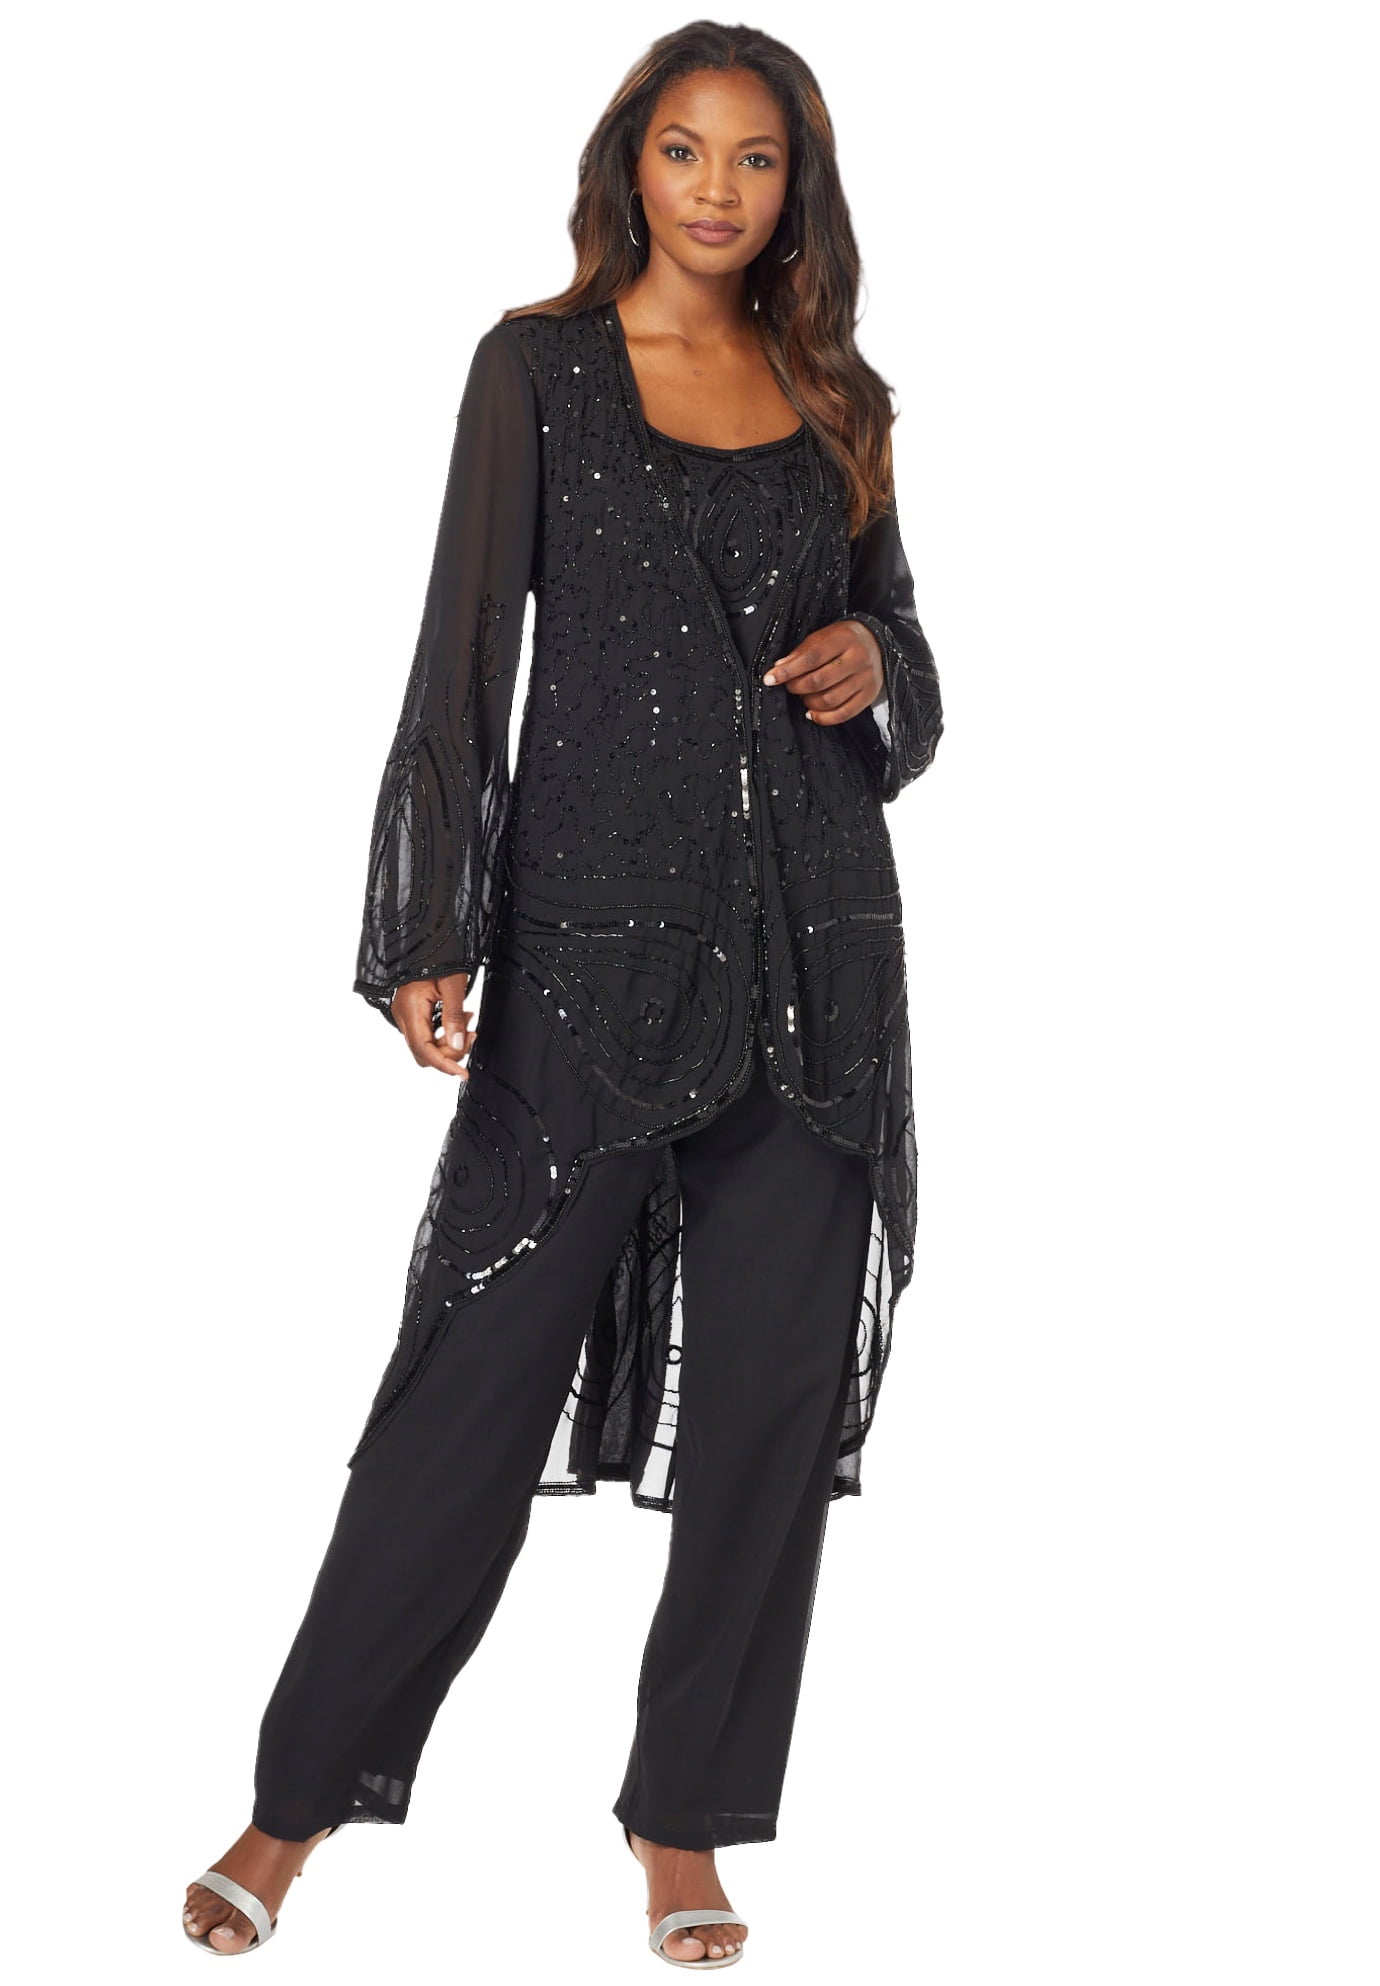 Roaman's Women's Plus Size Three-Piece Beaded Pant Suit Formal Evening Wear  Set, Mother Of The Bride Outfit